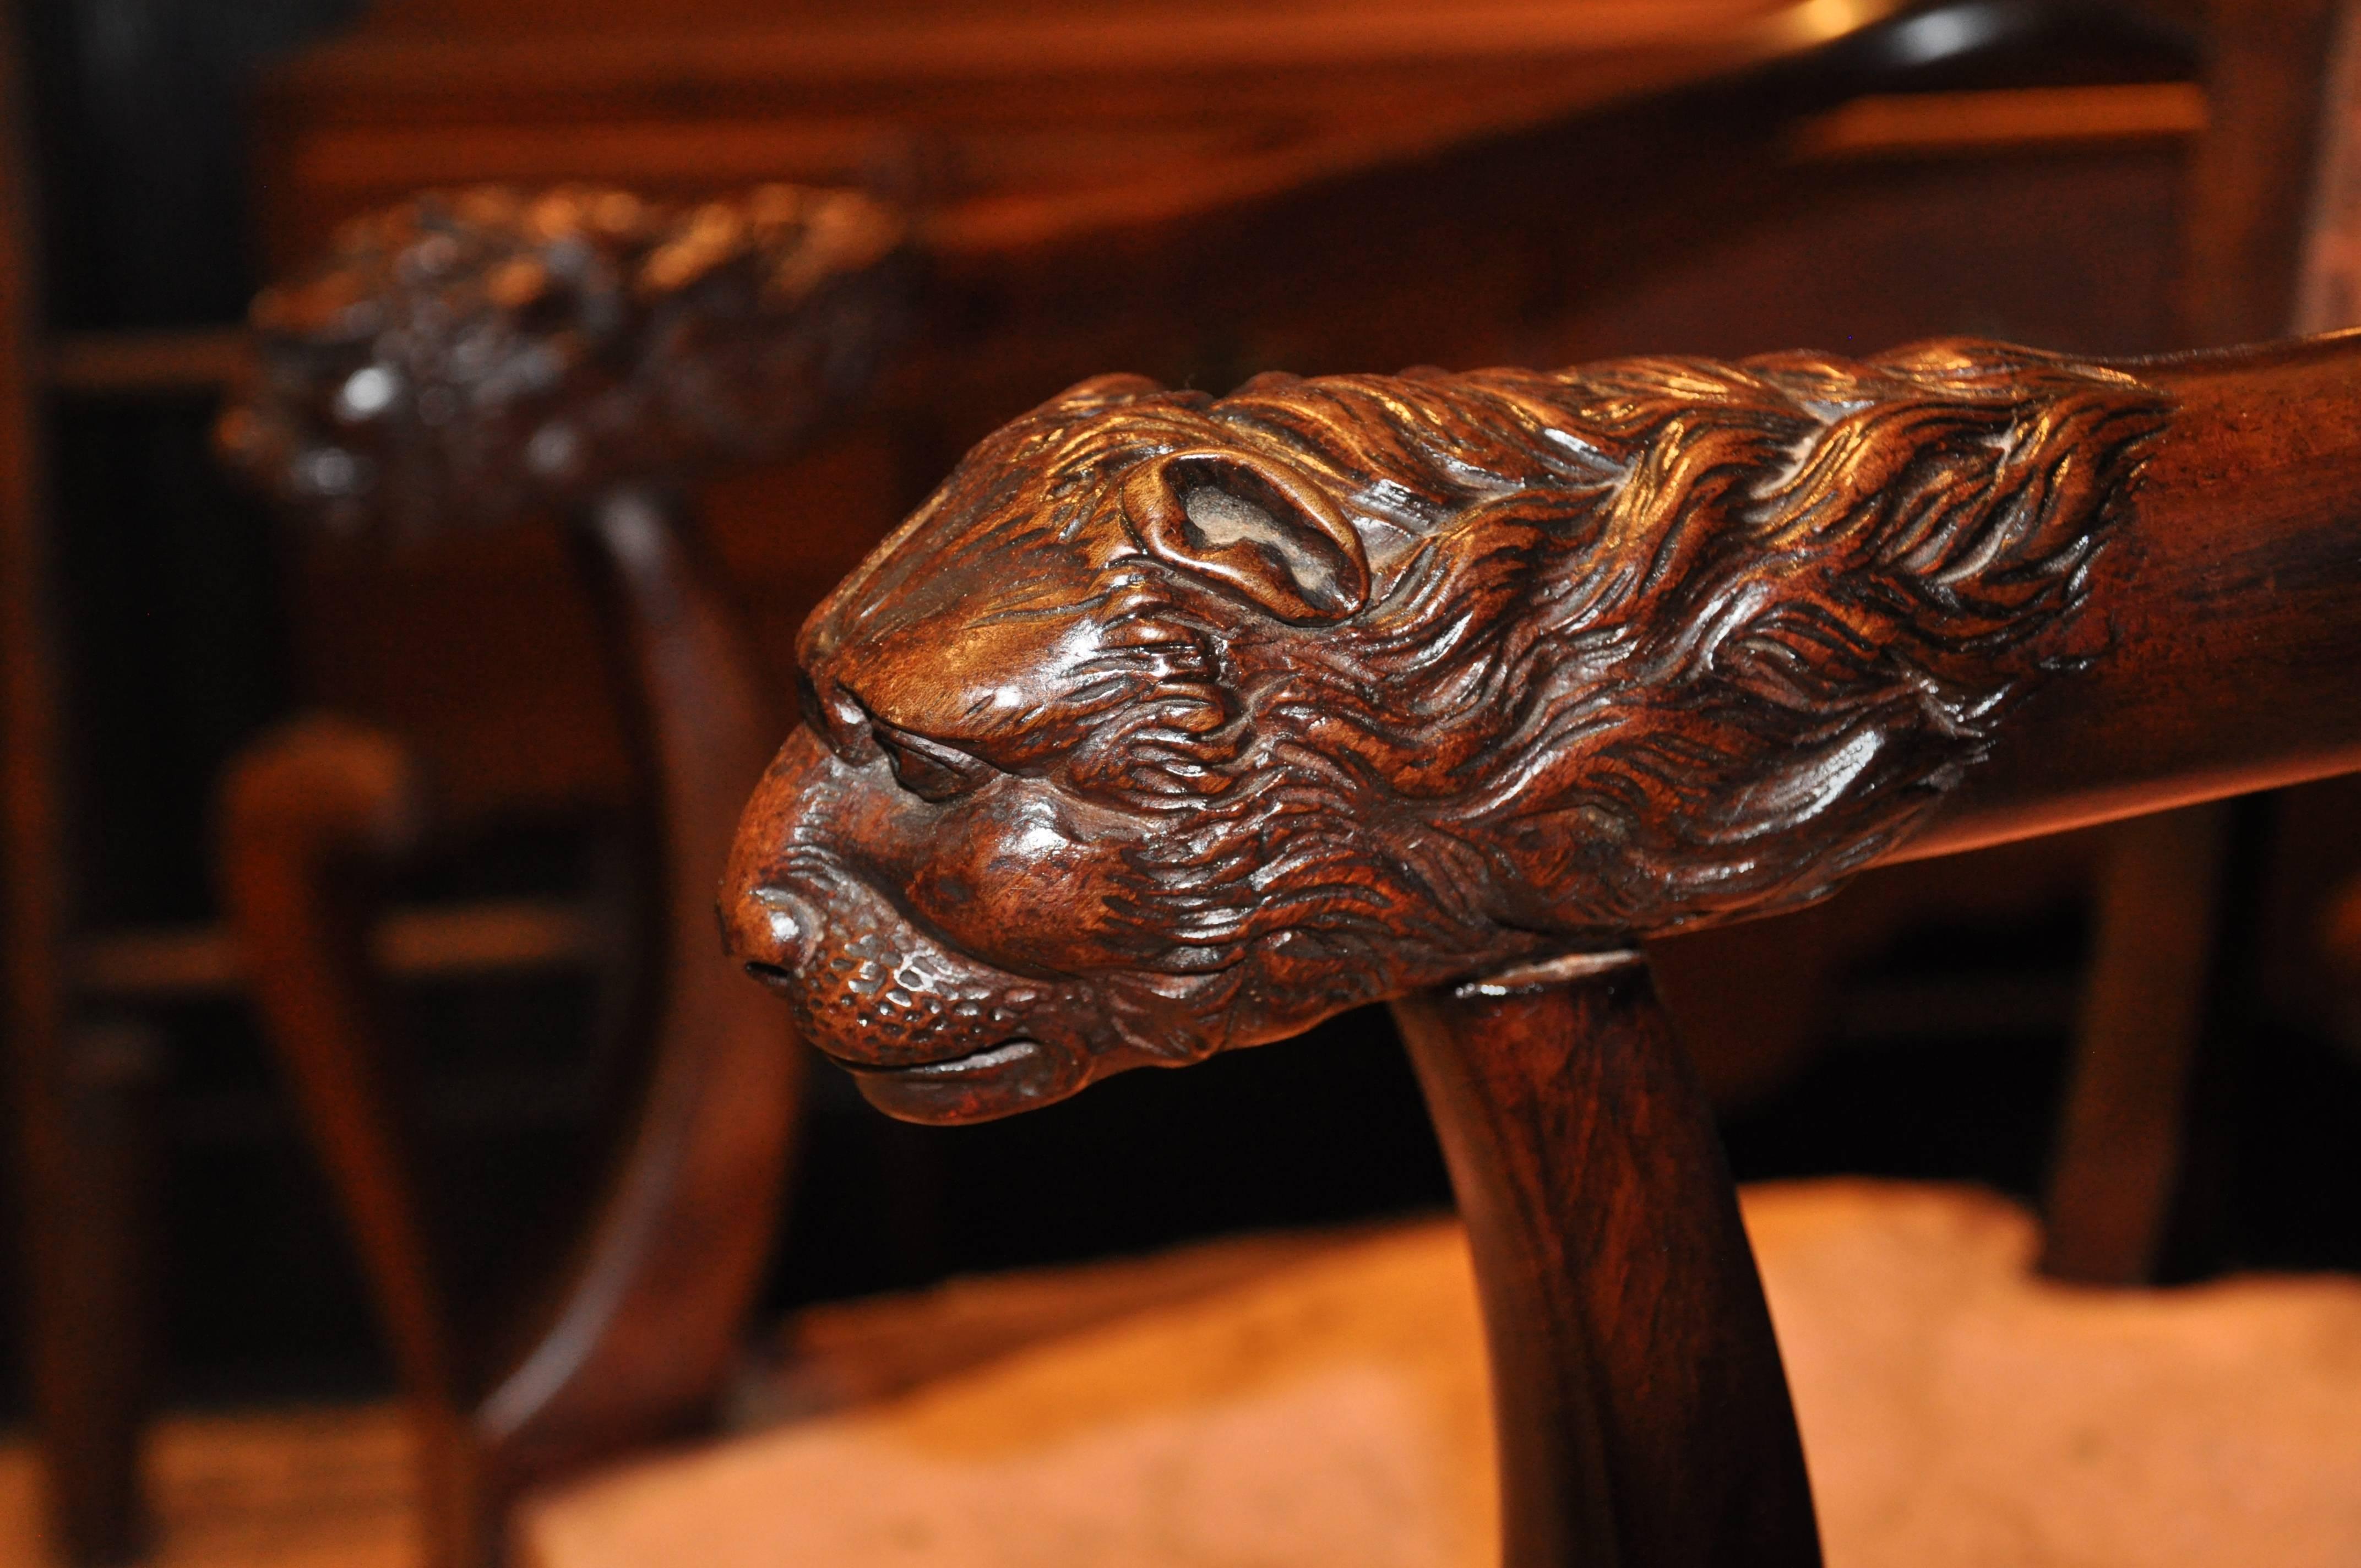 19th Century Pair of Period Russian or Austrian Neoclassical Walnut Chairs with Lion Motif For Sale